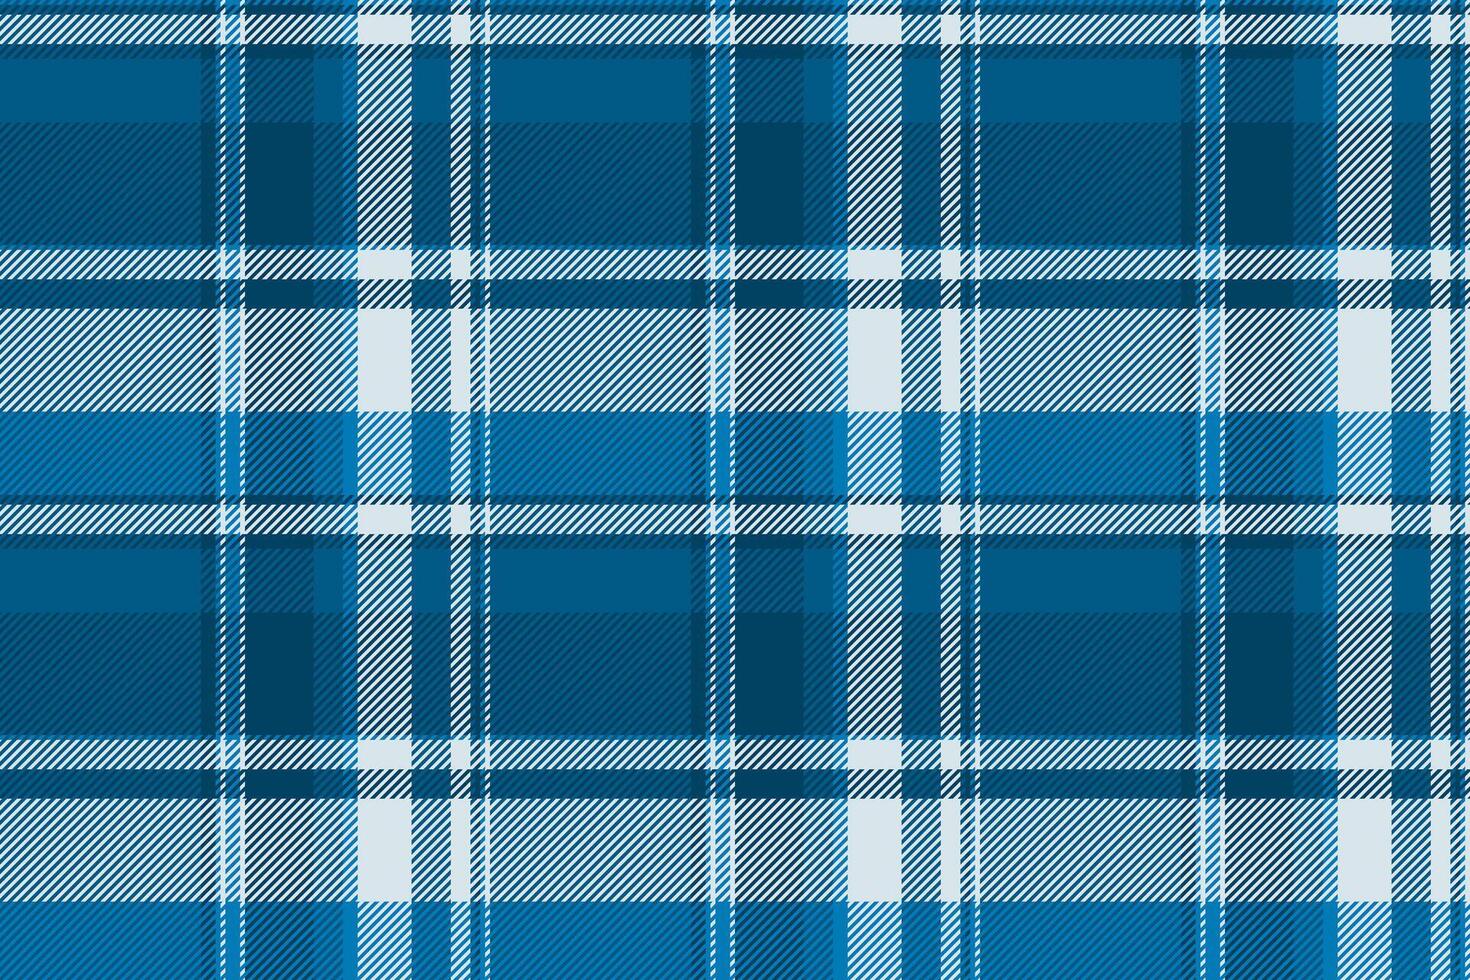 40s seamless vector pattern, naked plaid background fabric. Volume textile check tartan texture in cyan and light colors.